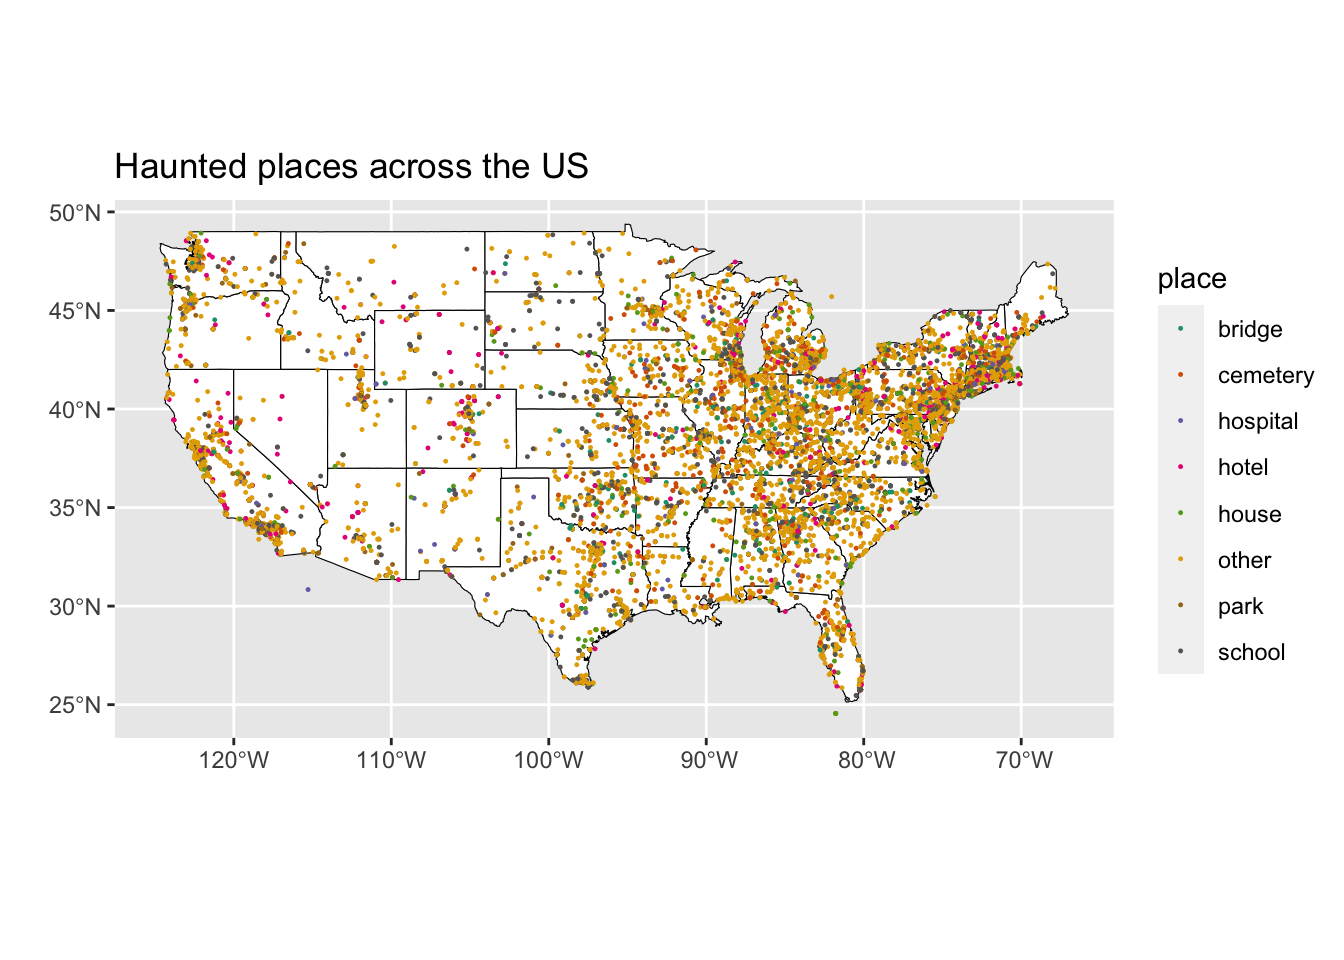 Scatterplot superimposed on a plot of the contiguous 48 United States.  Each dot represents a haunted place with the color distinguishing whether that place is a bridge, cemetary, hospital, hotel, house, school, park, or other.